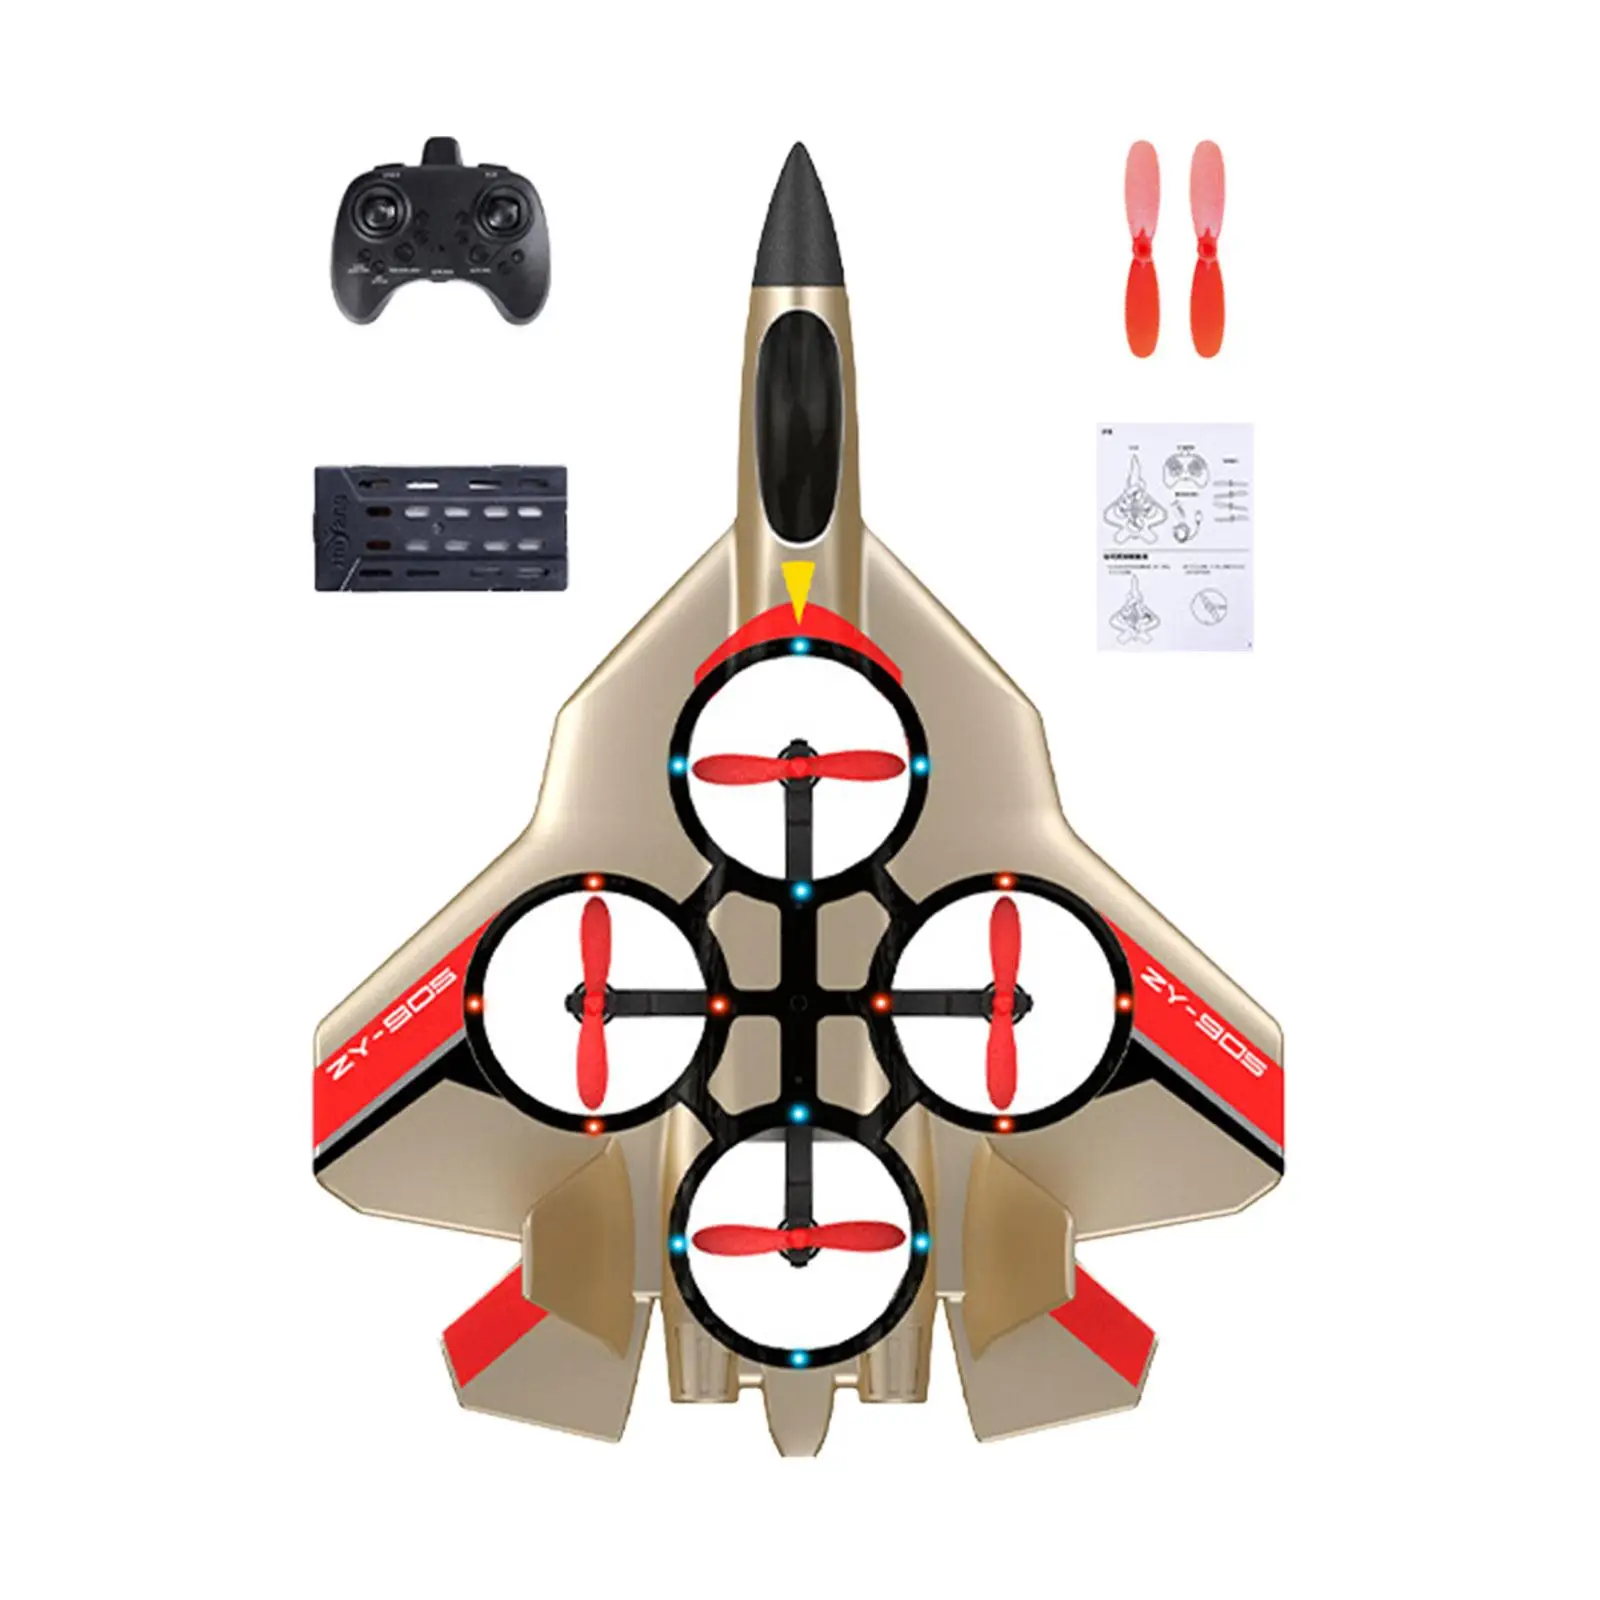 Remote Control Airplane Portable Easy to Control Outdoor Flighting Toys 4 Channel RC Glider 4 CH Plane for Adults Kids Gift